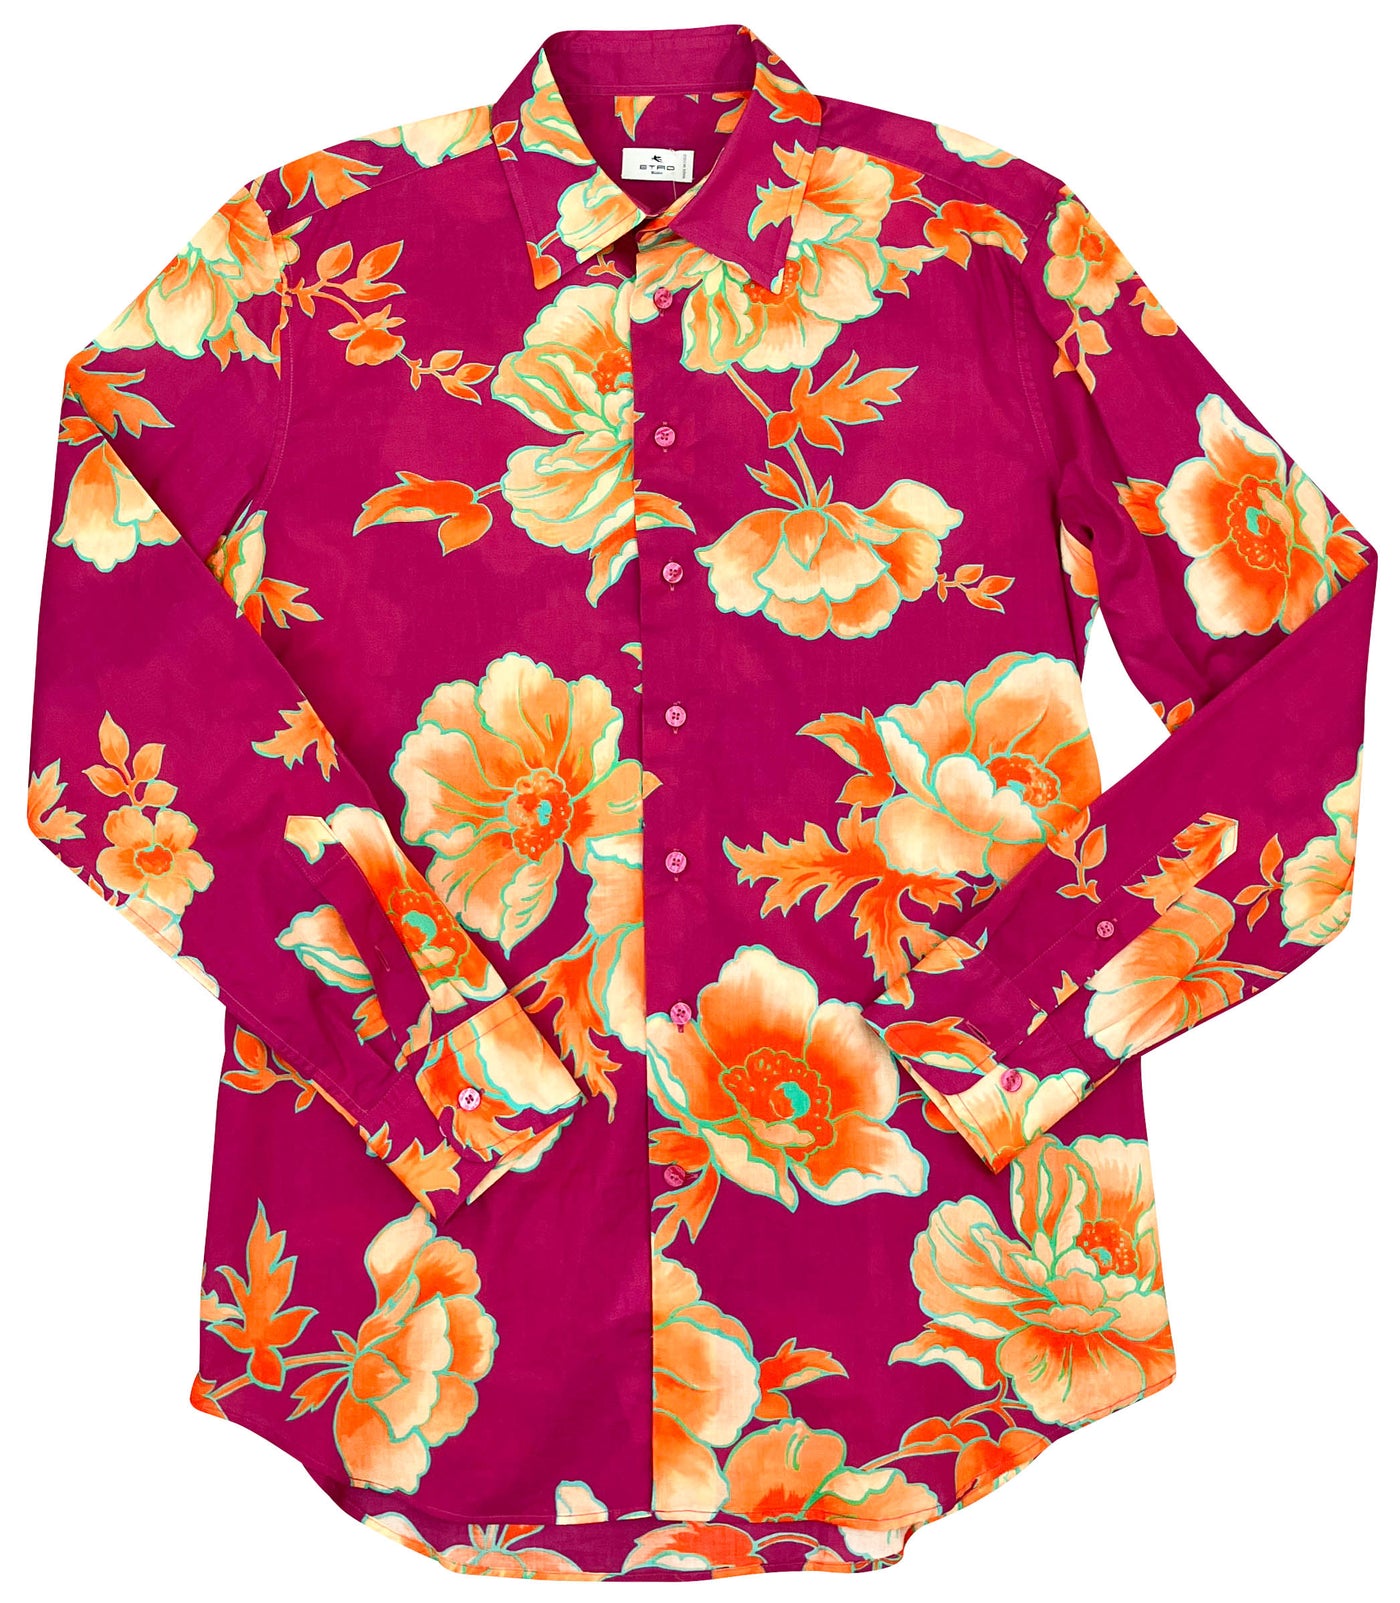 Etro Floral Button Down Shirt in Magenta/Orange - Discounts on Etro at UAL